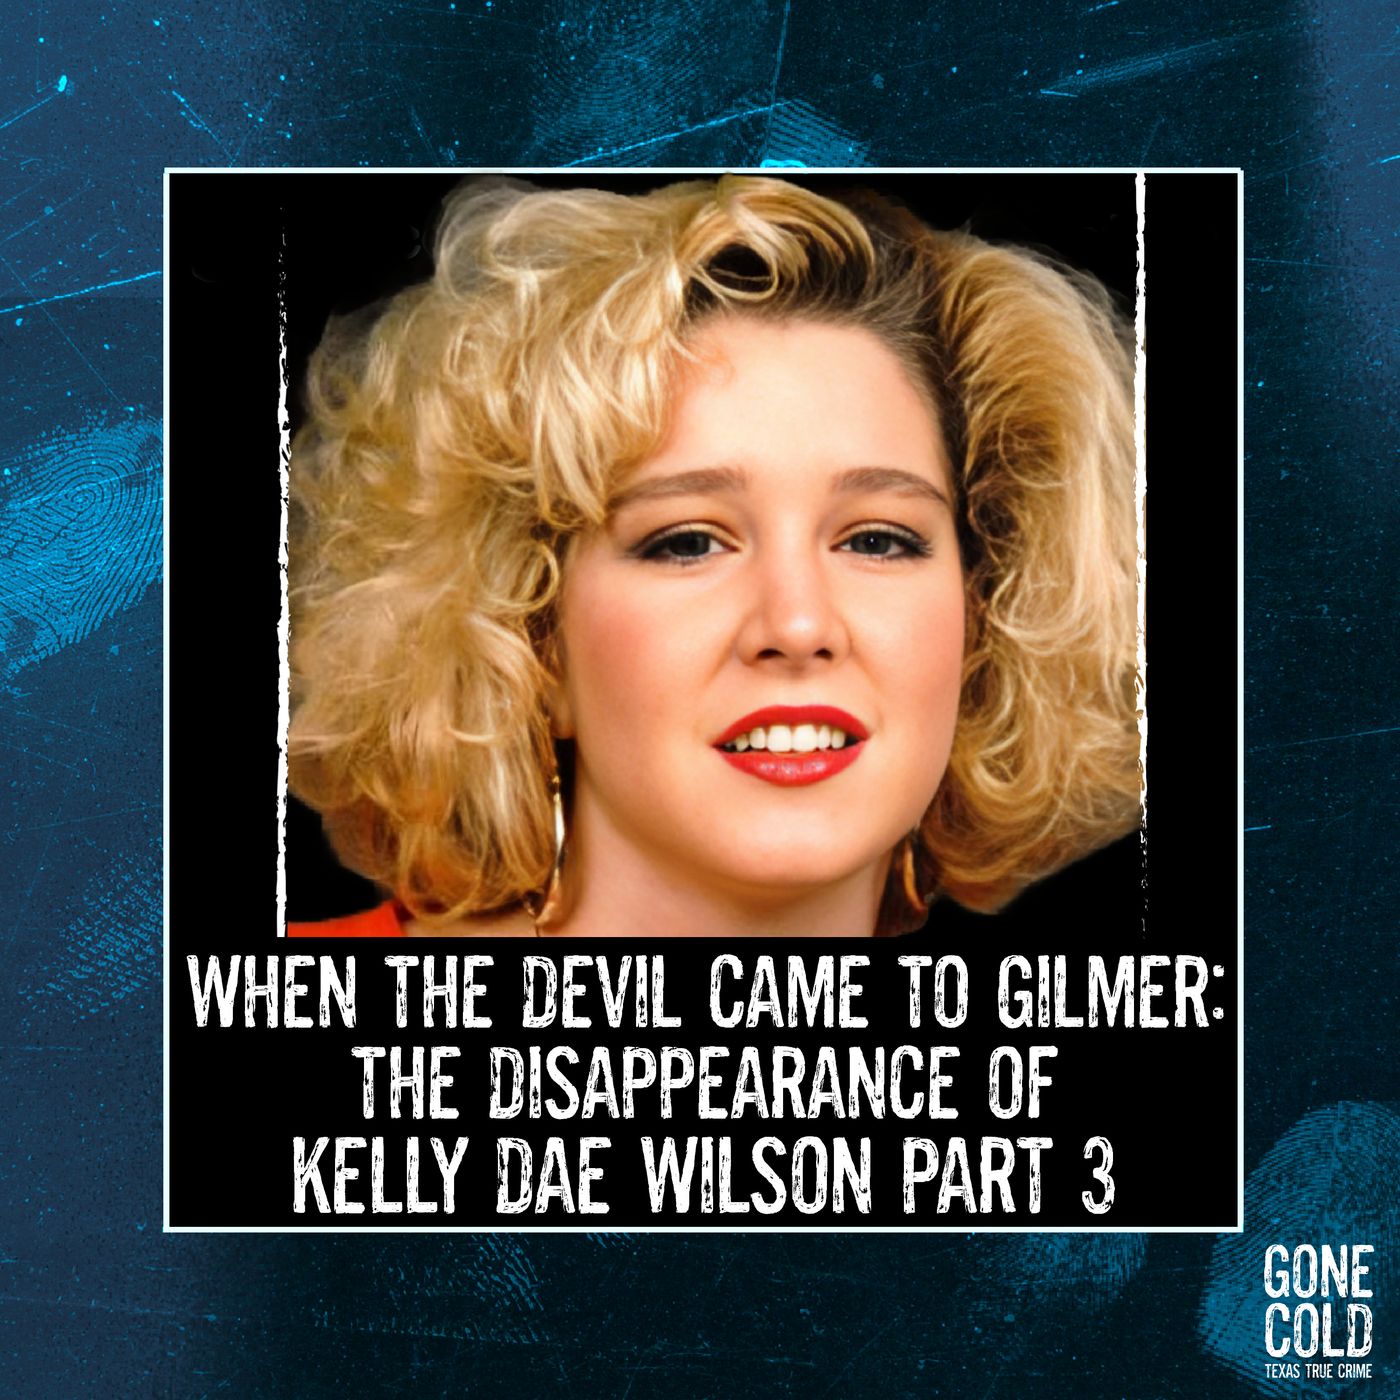 When the Devil Came to Gilmer: The Disappearance of Kelly Dae Wilson Part 3